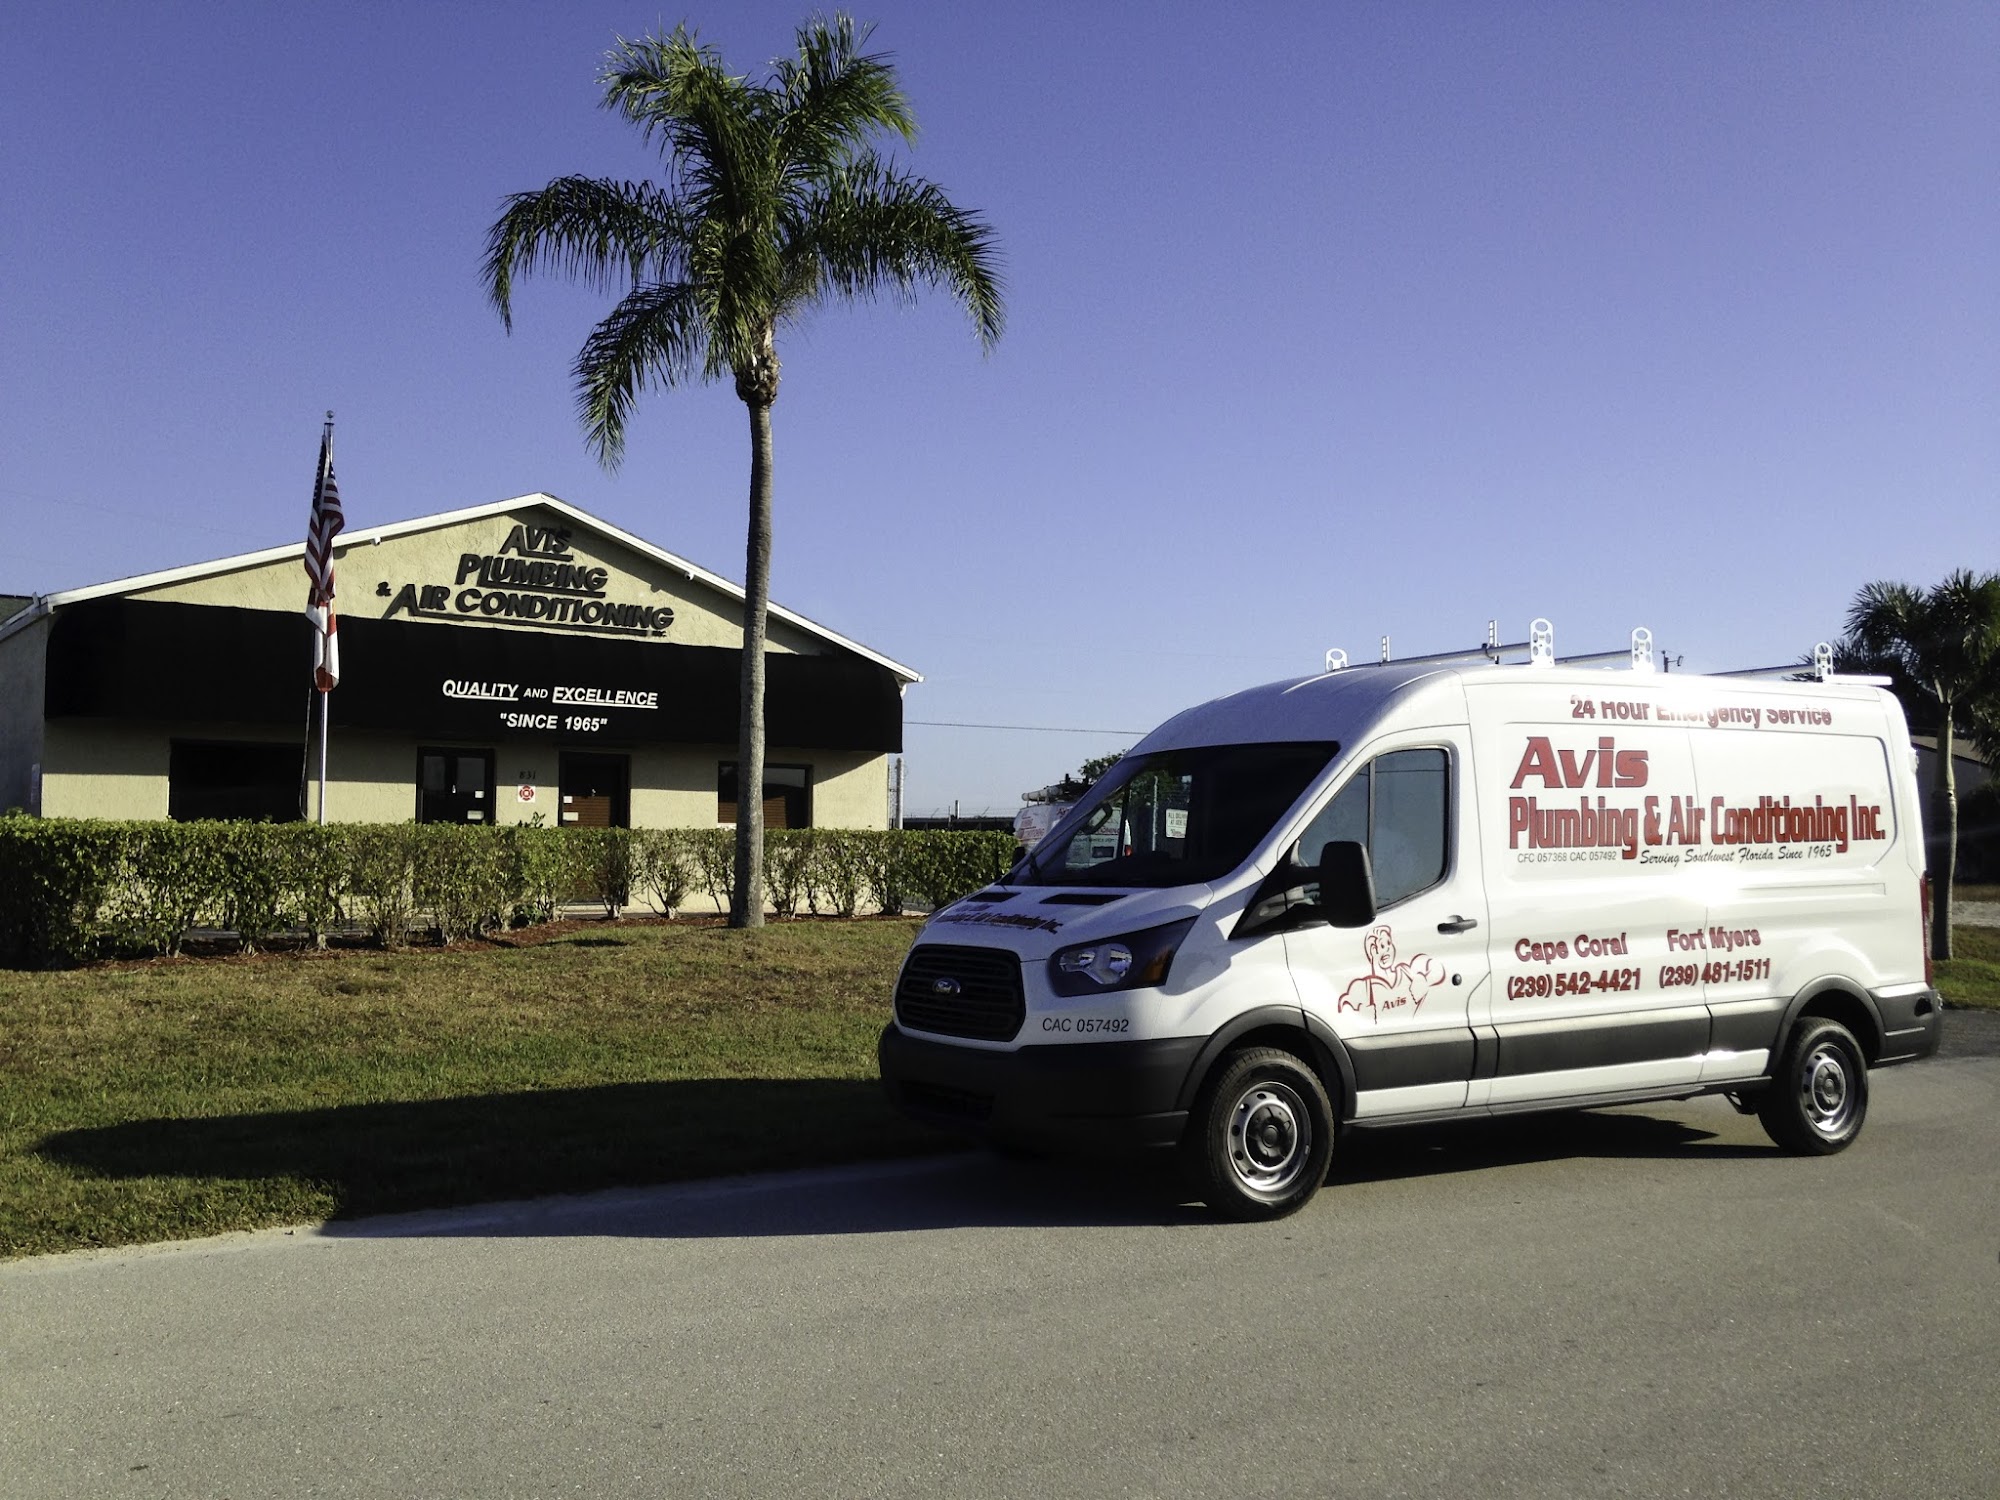 Avis Plumbing and Air Conditioning, Inc.